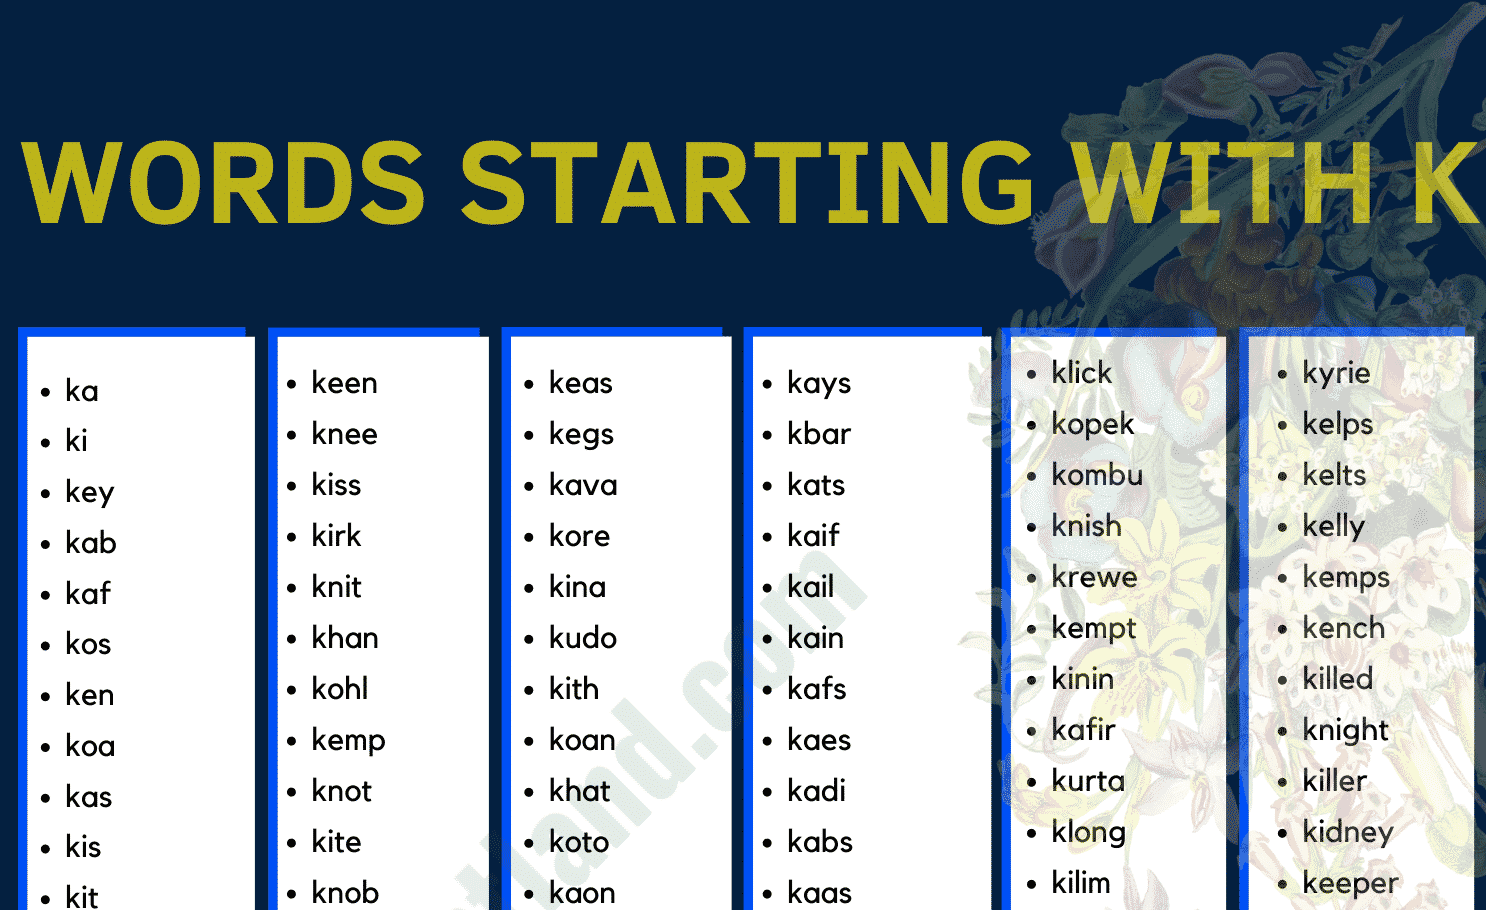 Words That Start With Ka